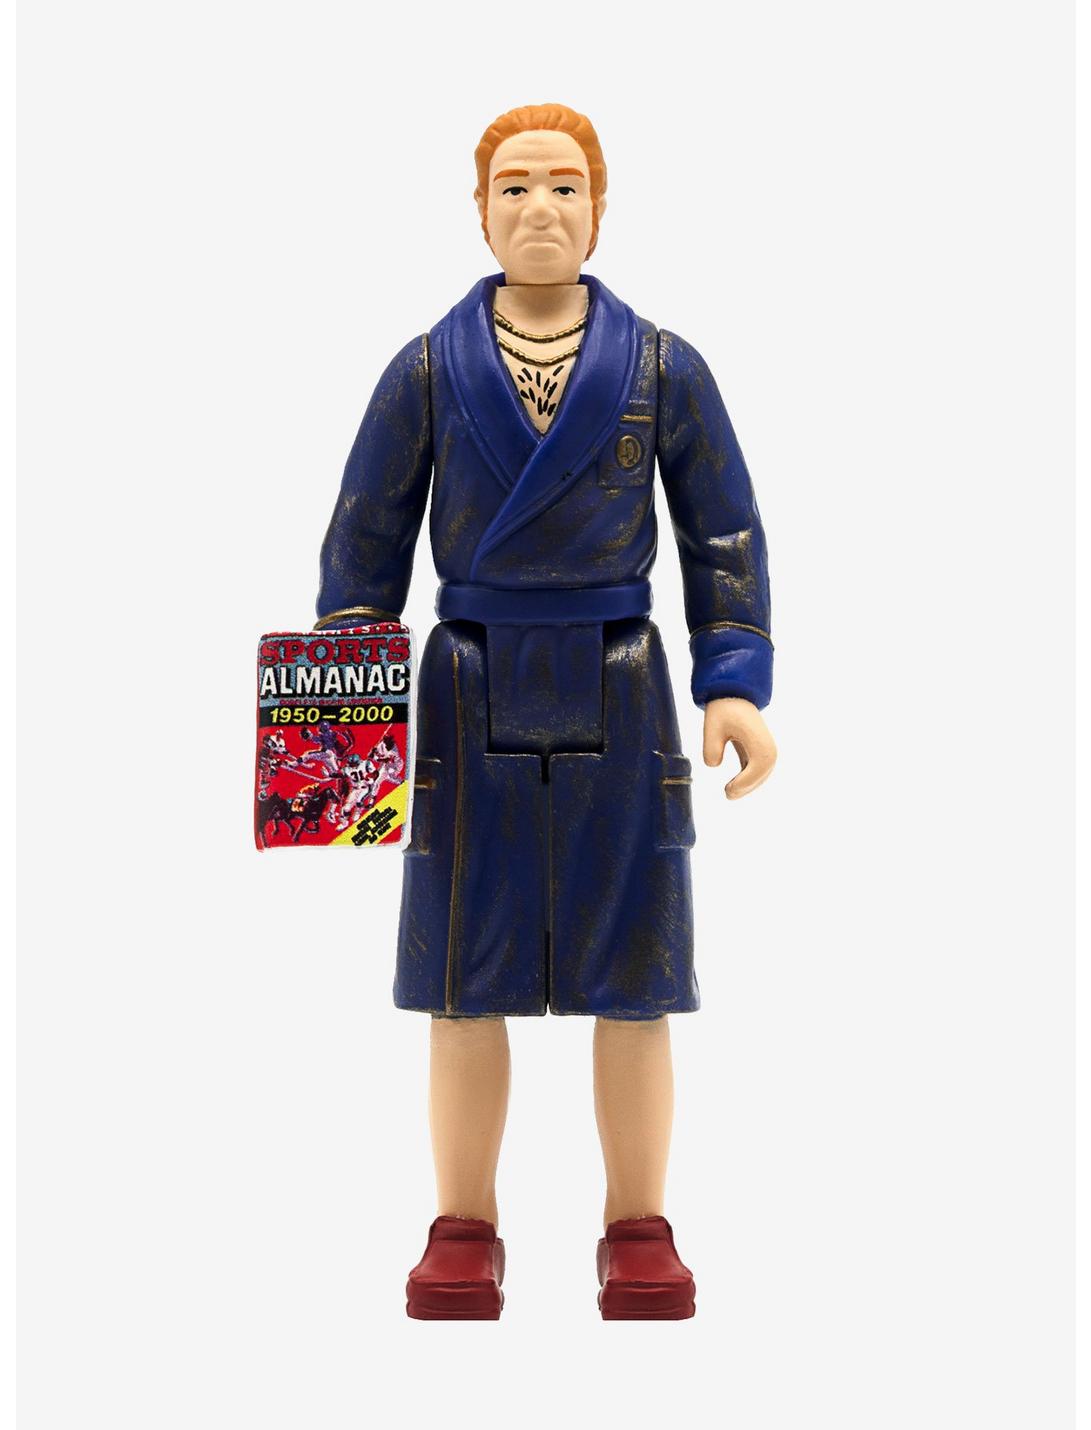 Super7 ReAction Back To The Future II Biff Tannen Bathrobe Collectible Action Figure, , hi-res